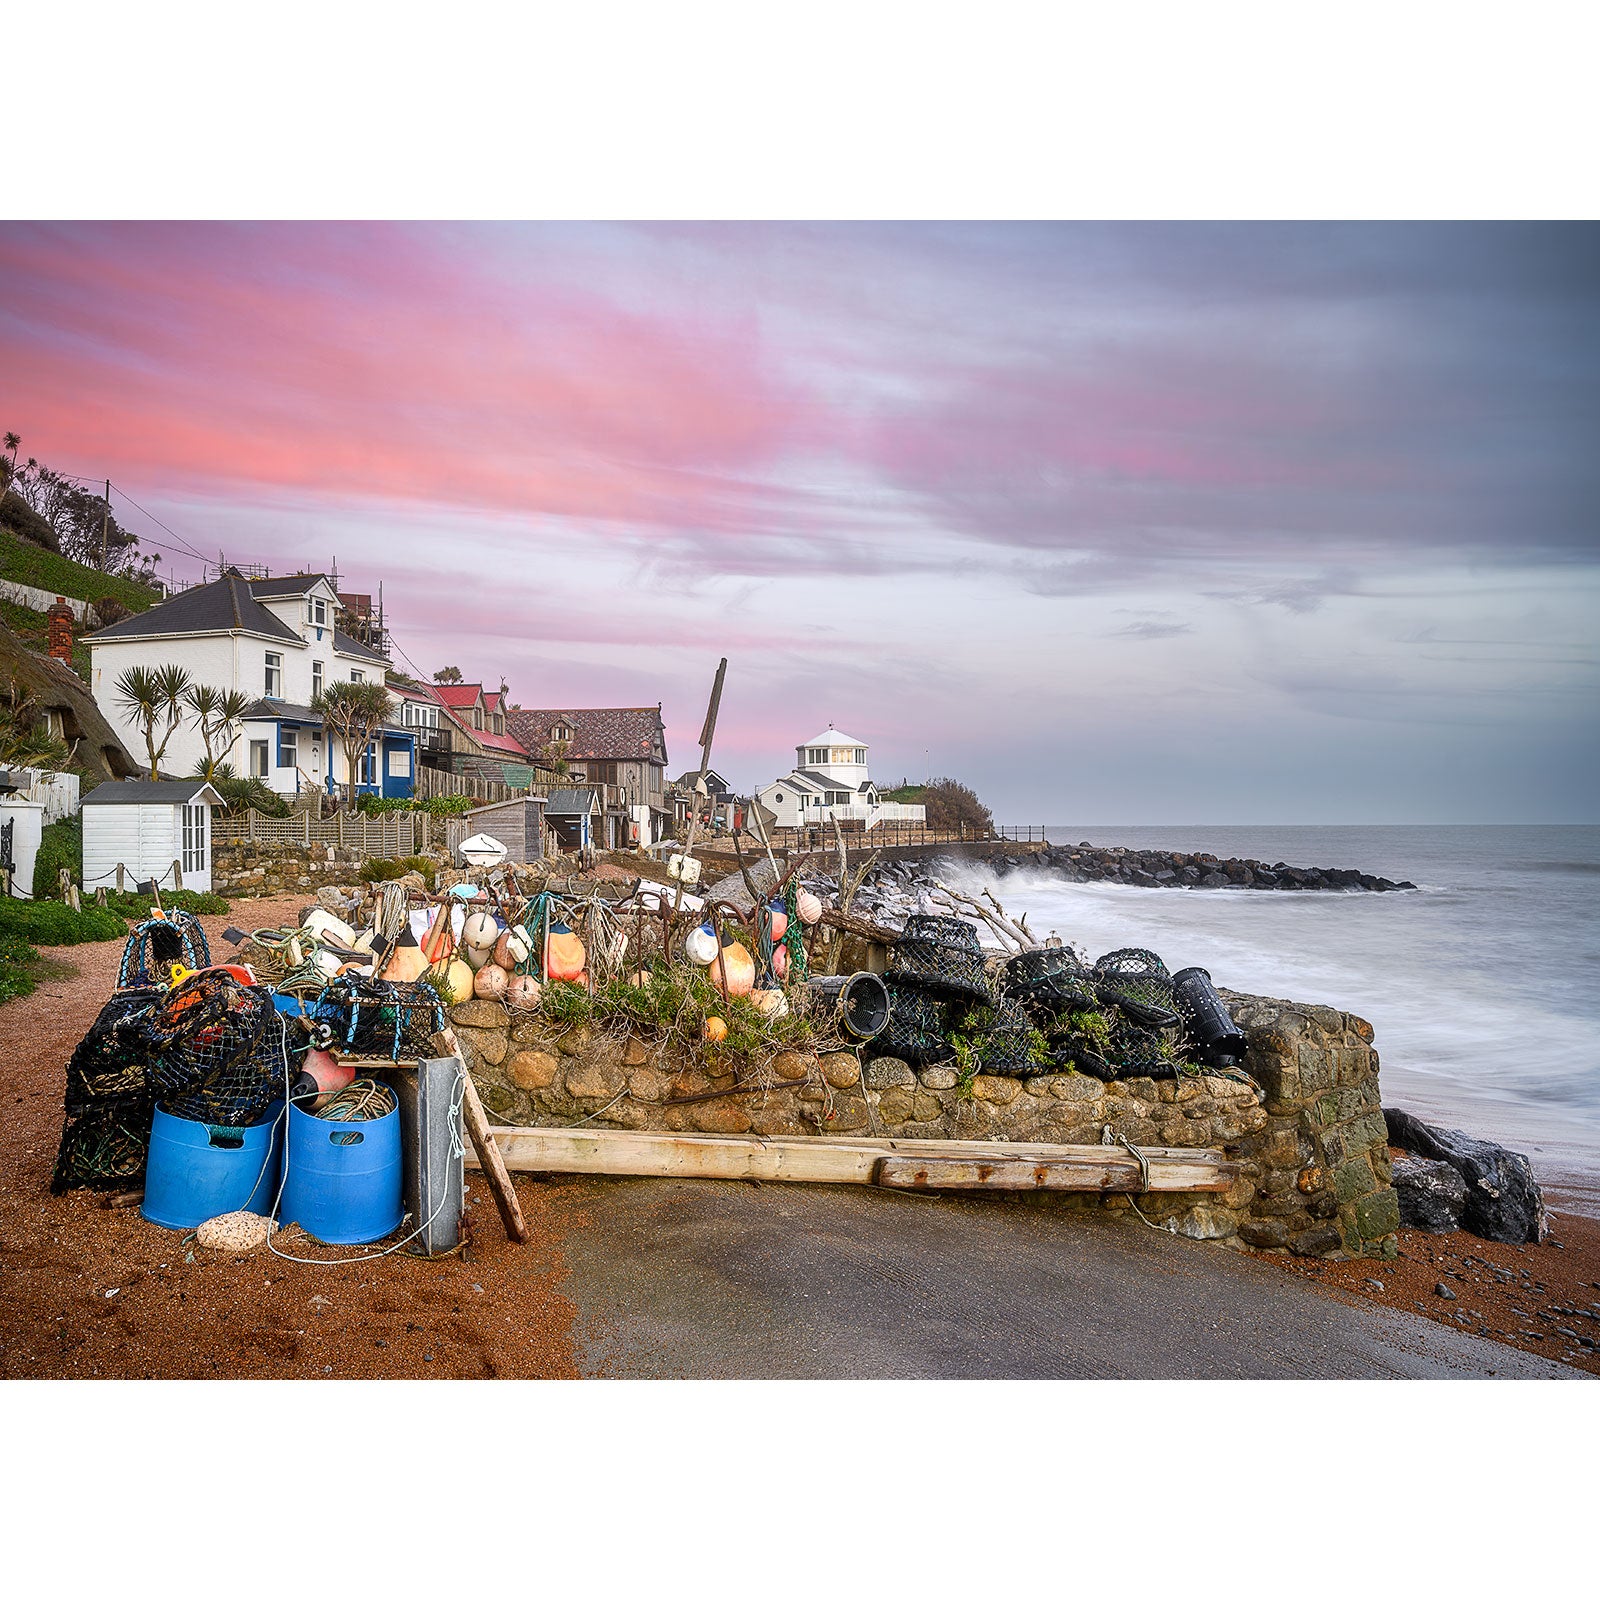 Image number 2807: Steephill Cove at sunset with fishing equipment and colorful sky, captured by Available Light Photography.